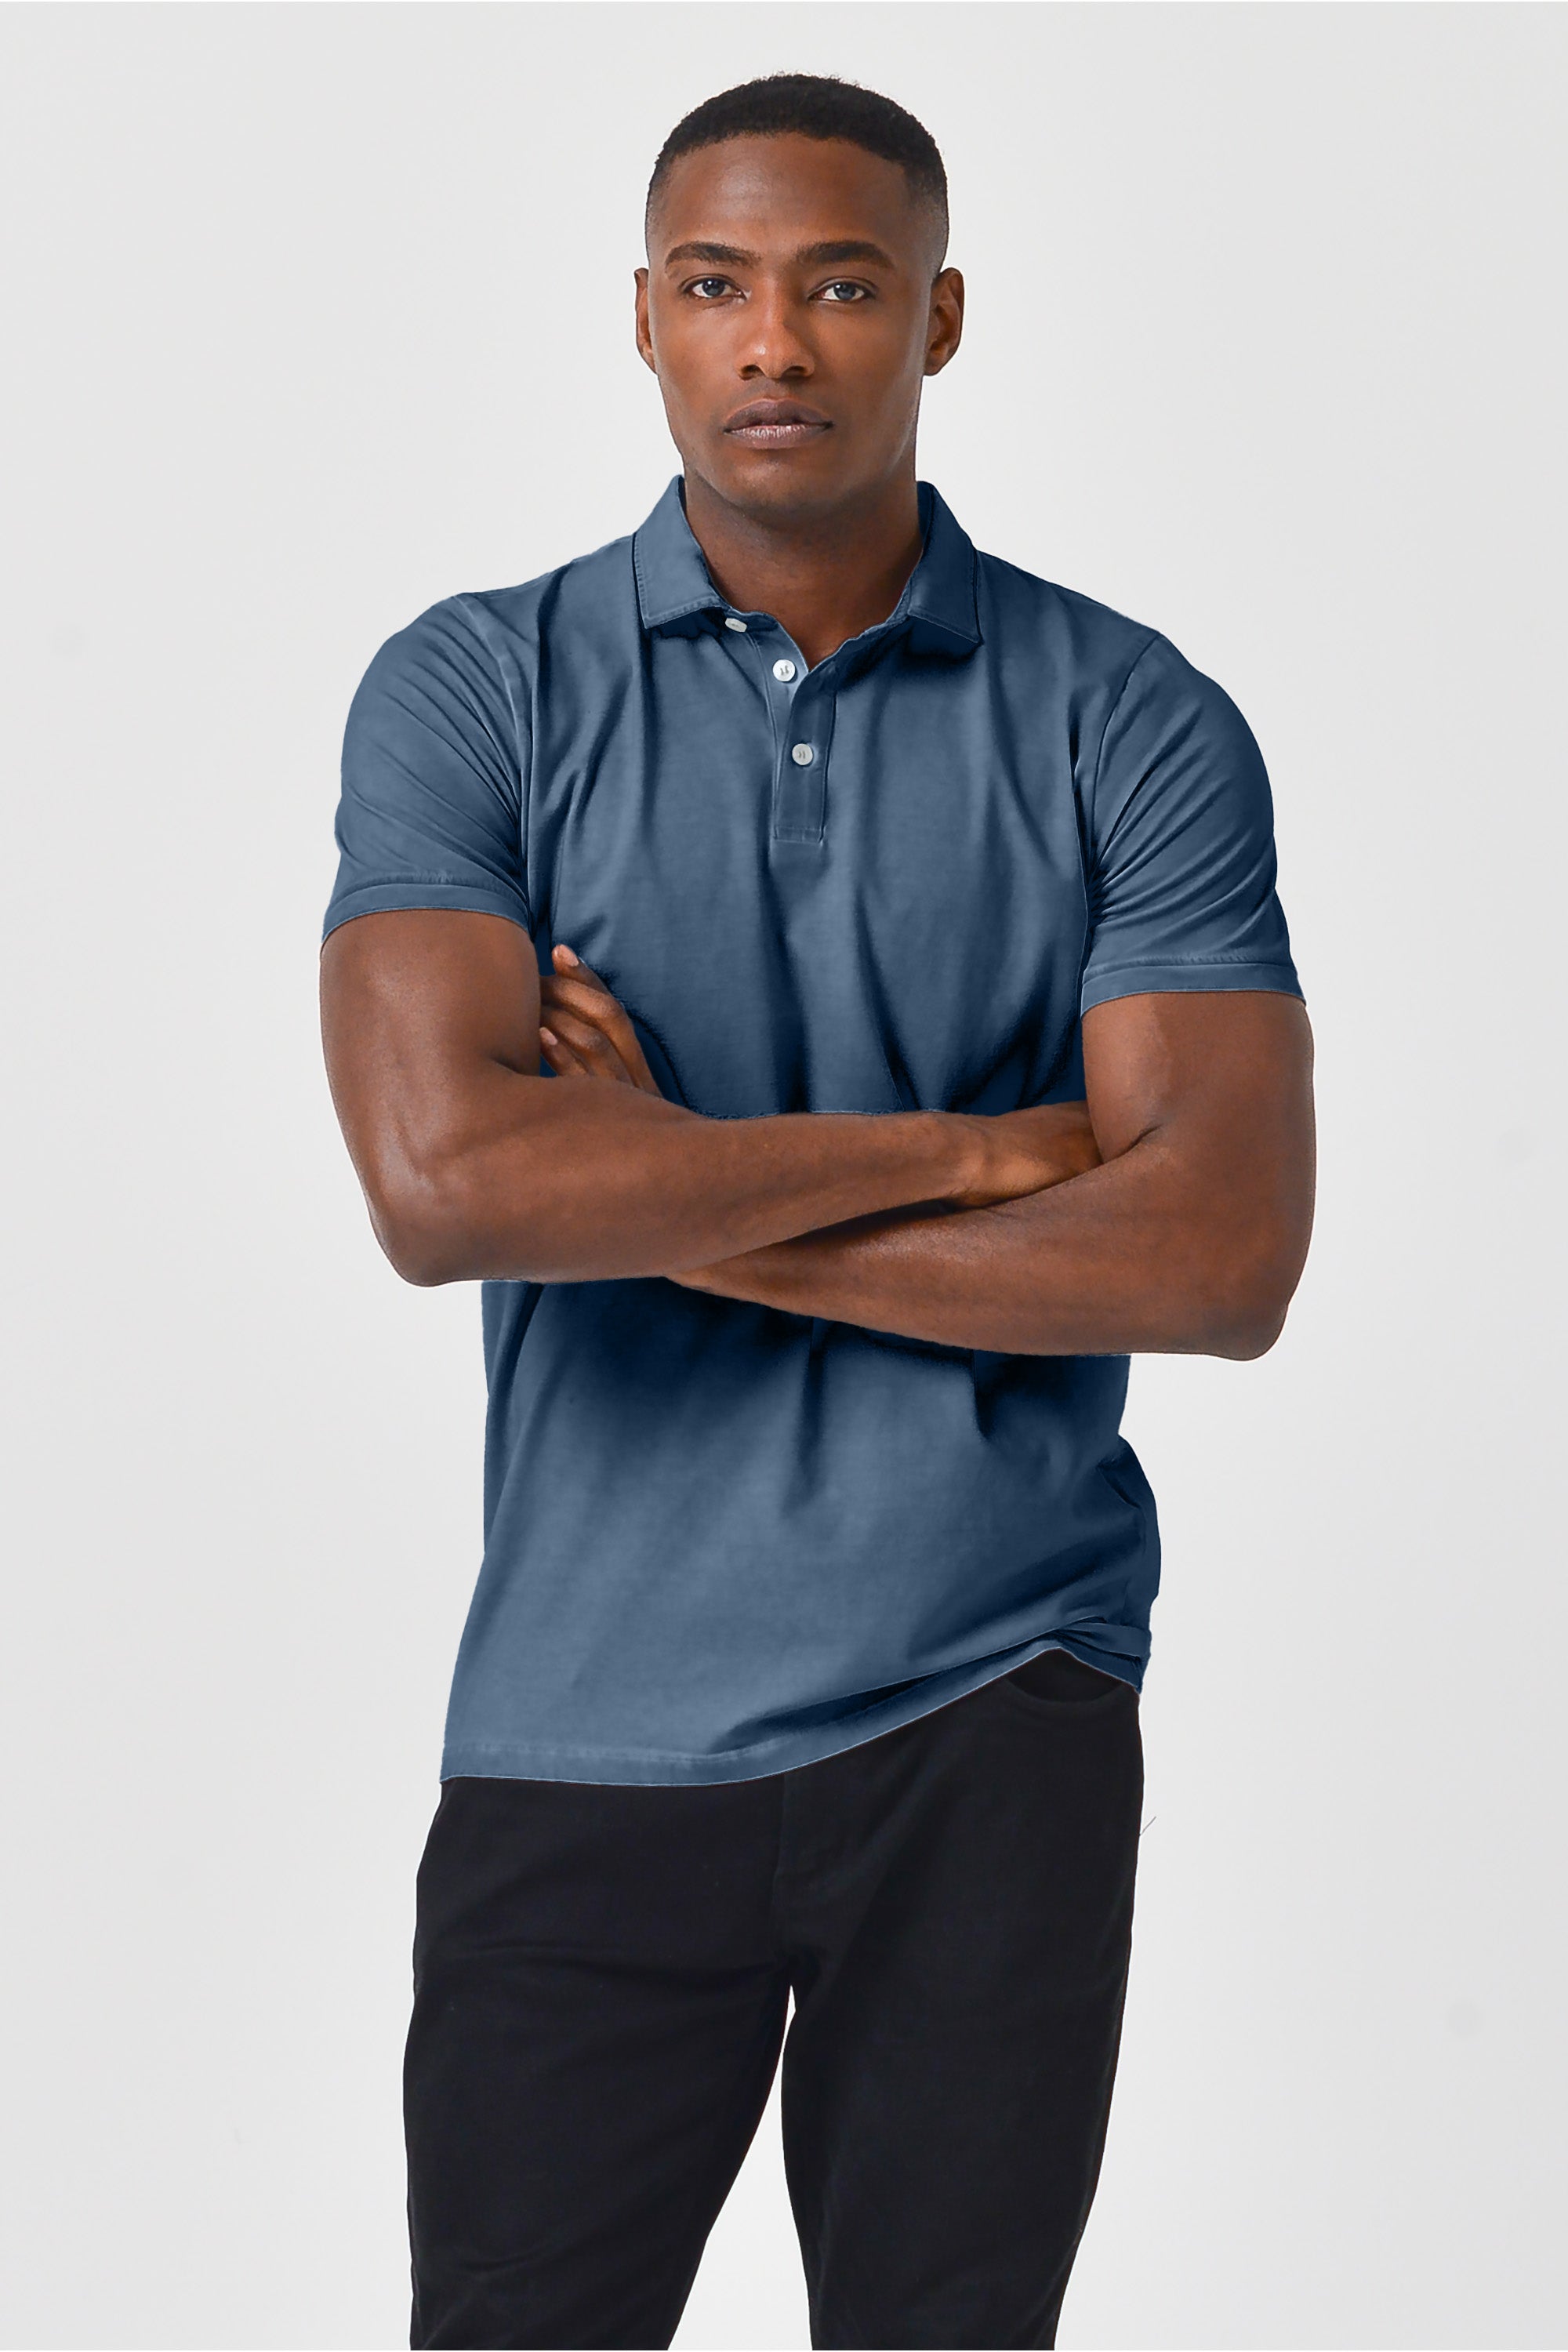 Performance Polo in Whale